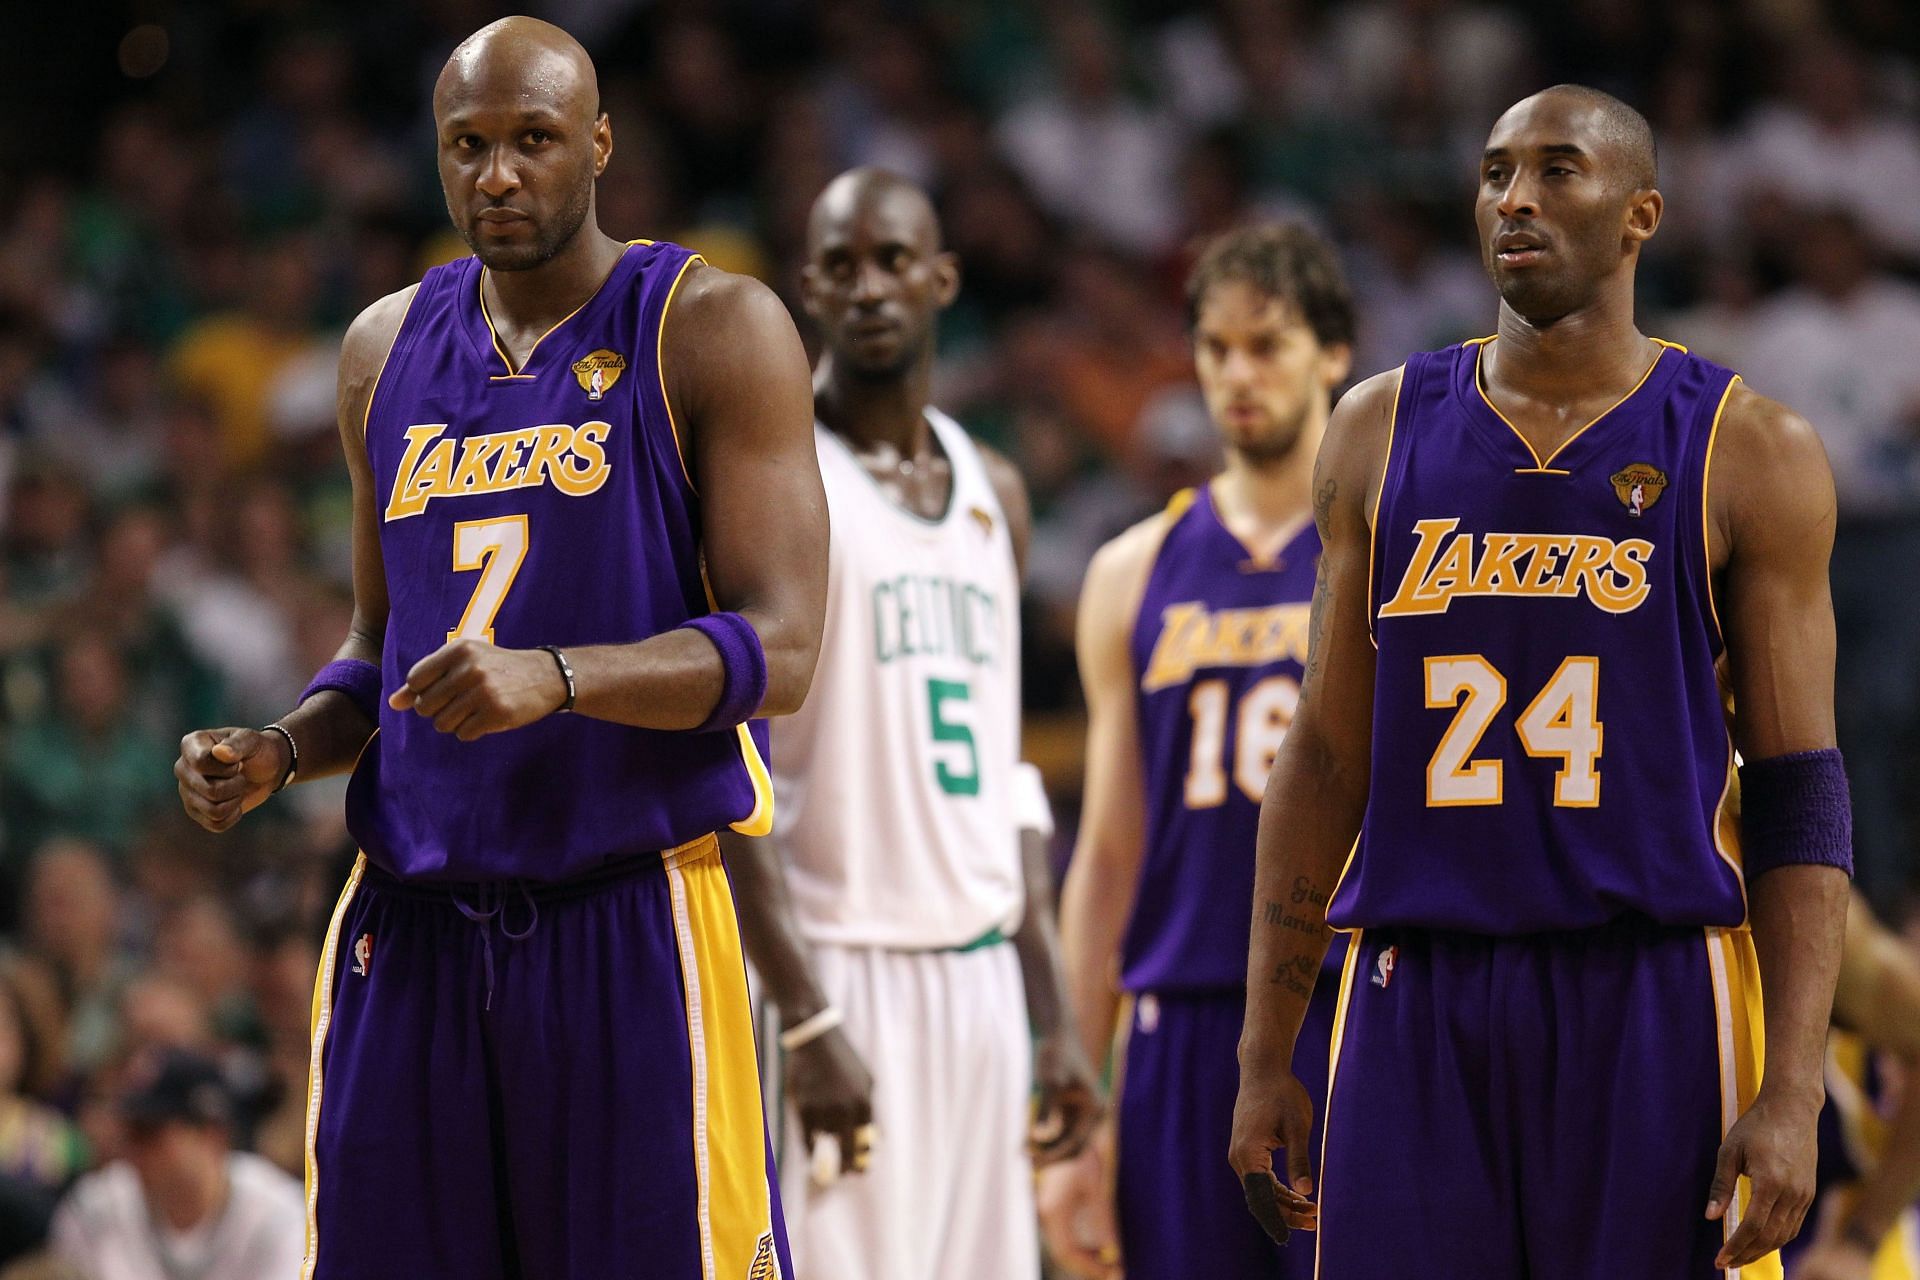 Lamar Odom (left) and Kobe Bryant during their time with the LA Lakers